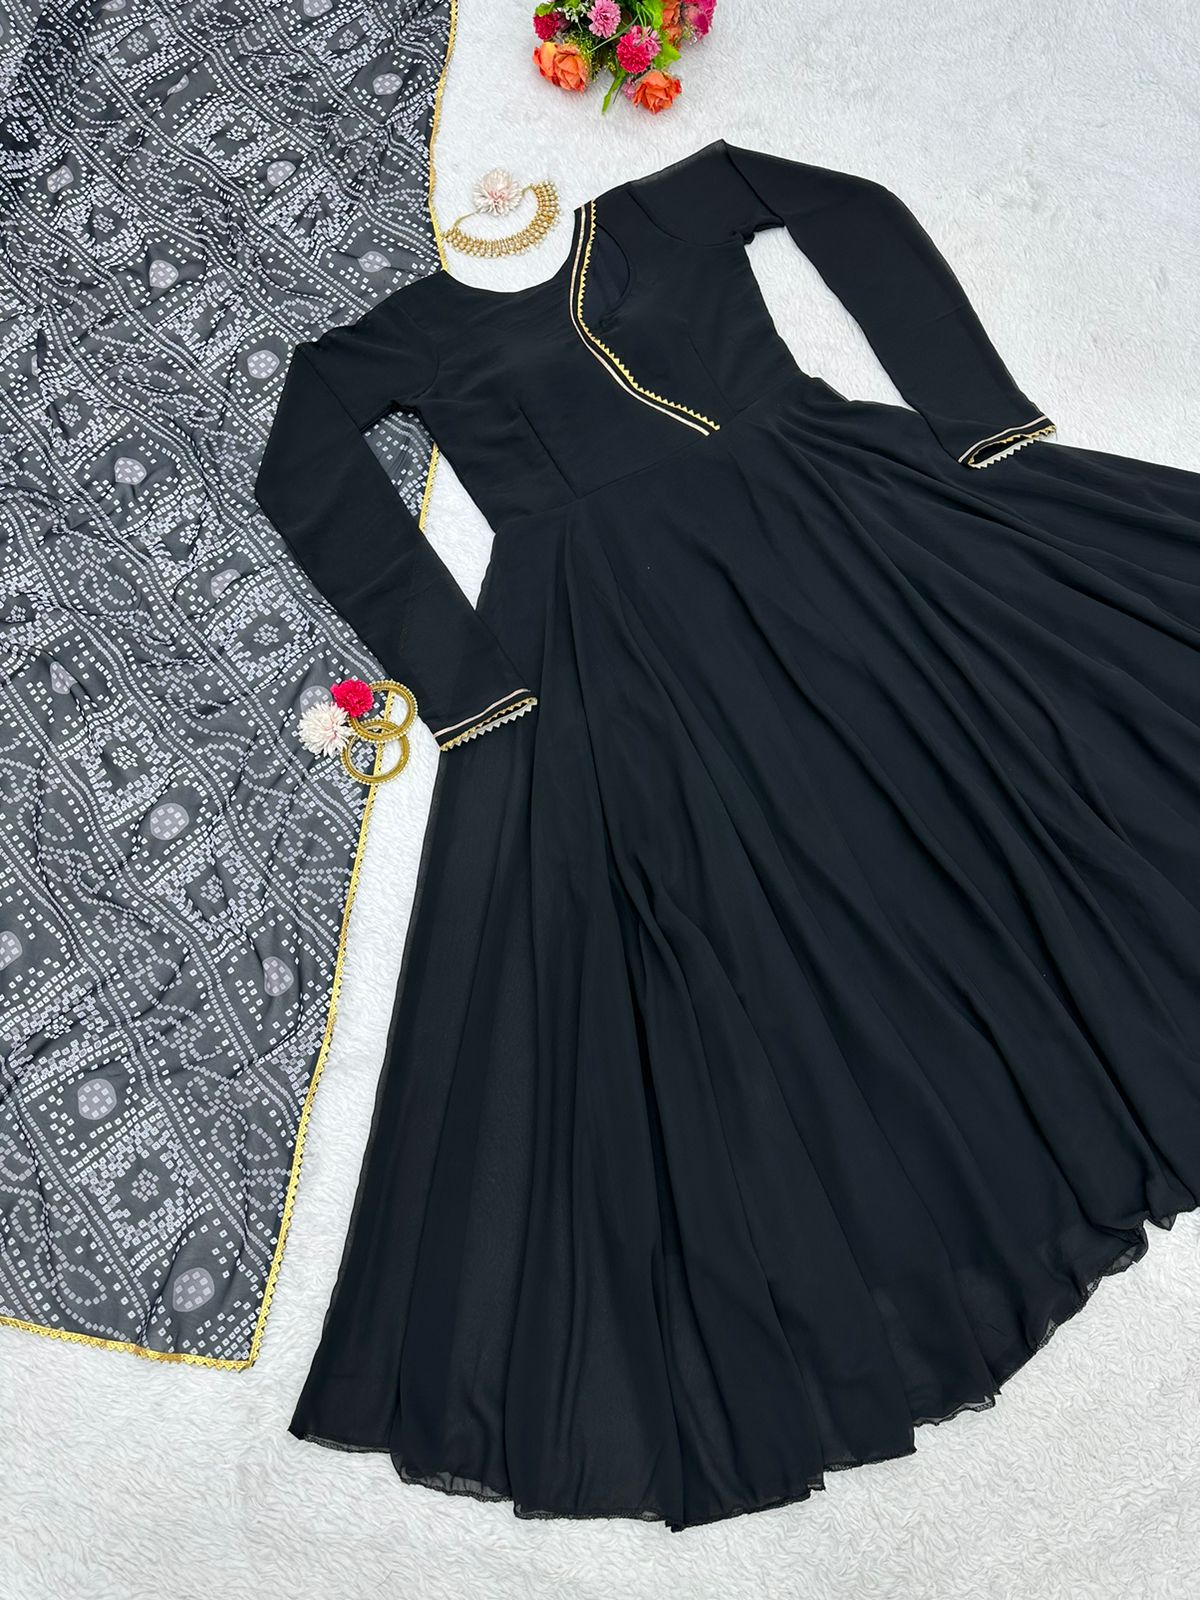 Evening Wear Gown In Black Colour | lupon.gov.ph